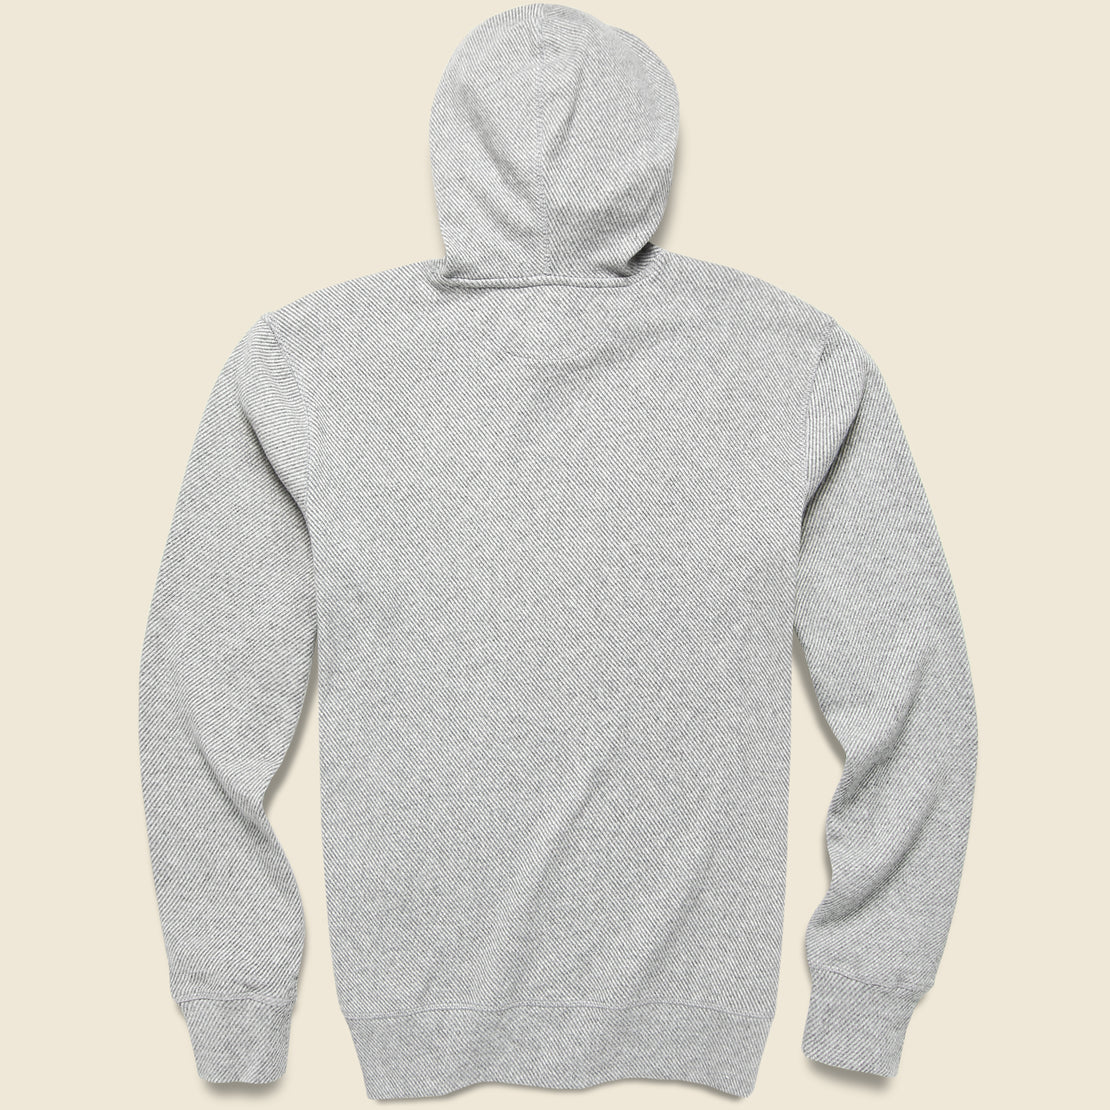 Legend Sweater Hoodie - Fossil Grey Twill - Faherty - STAG Provisions - Tops - Fleece / Sweatshirt